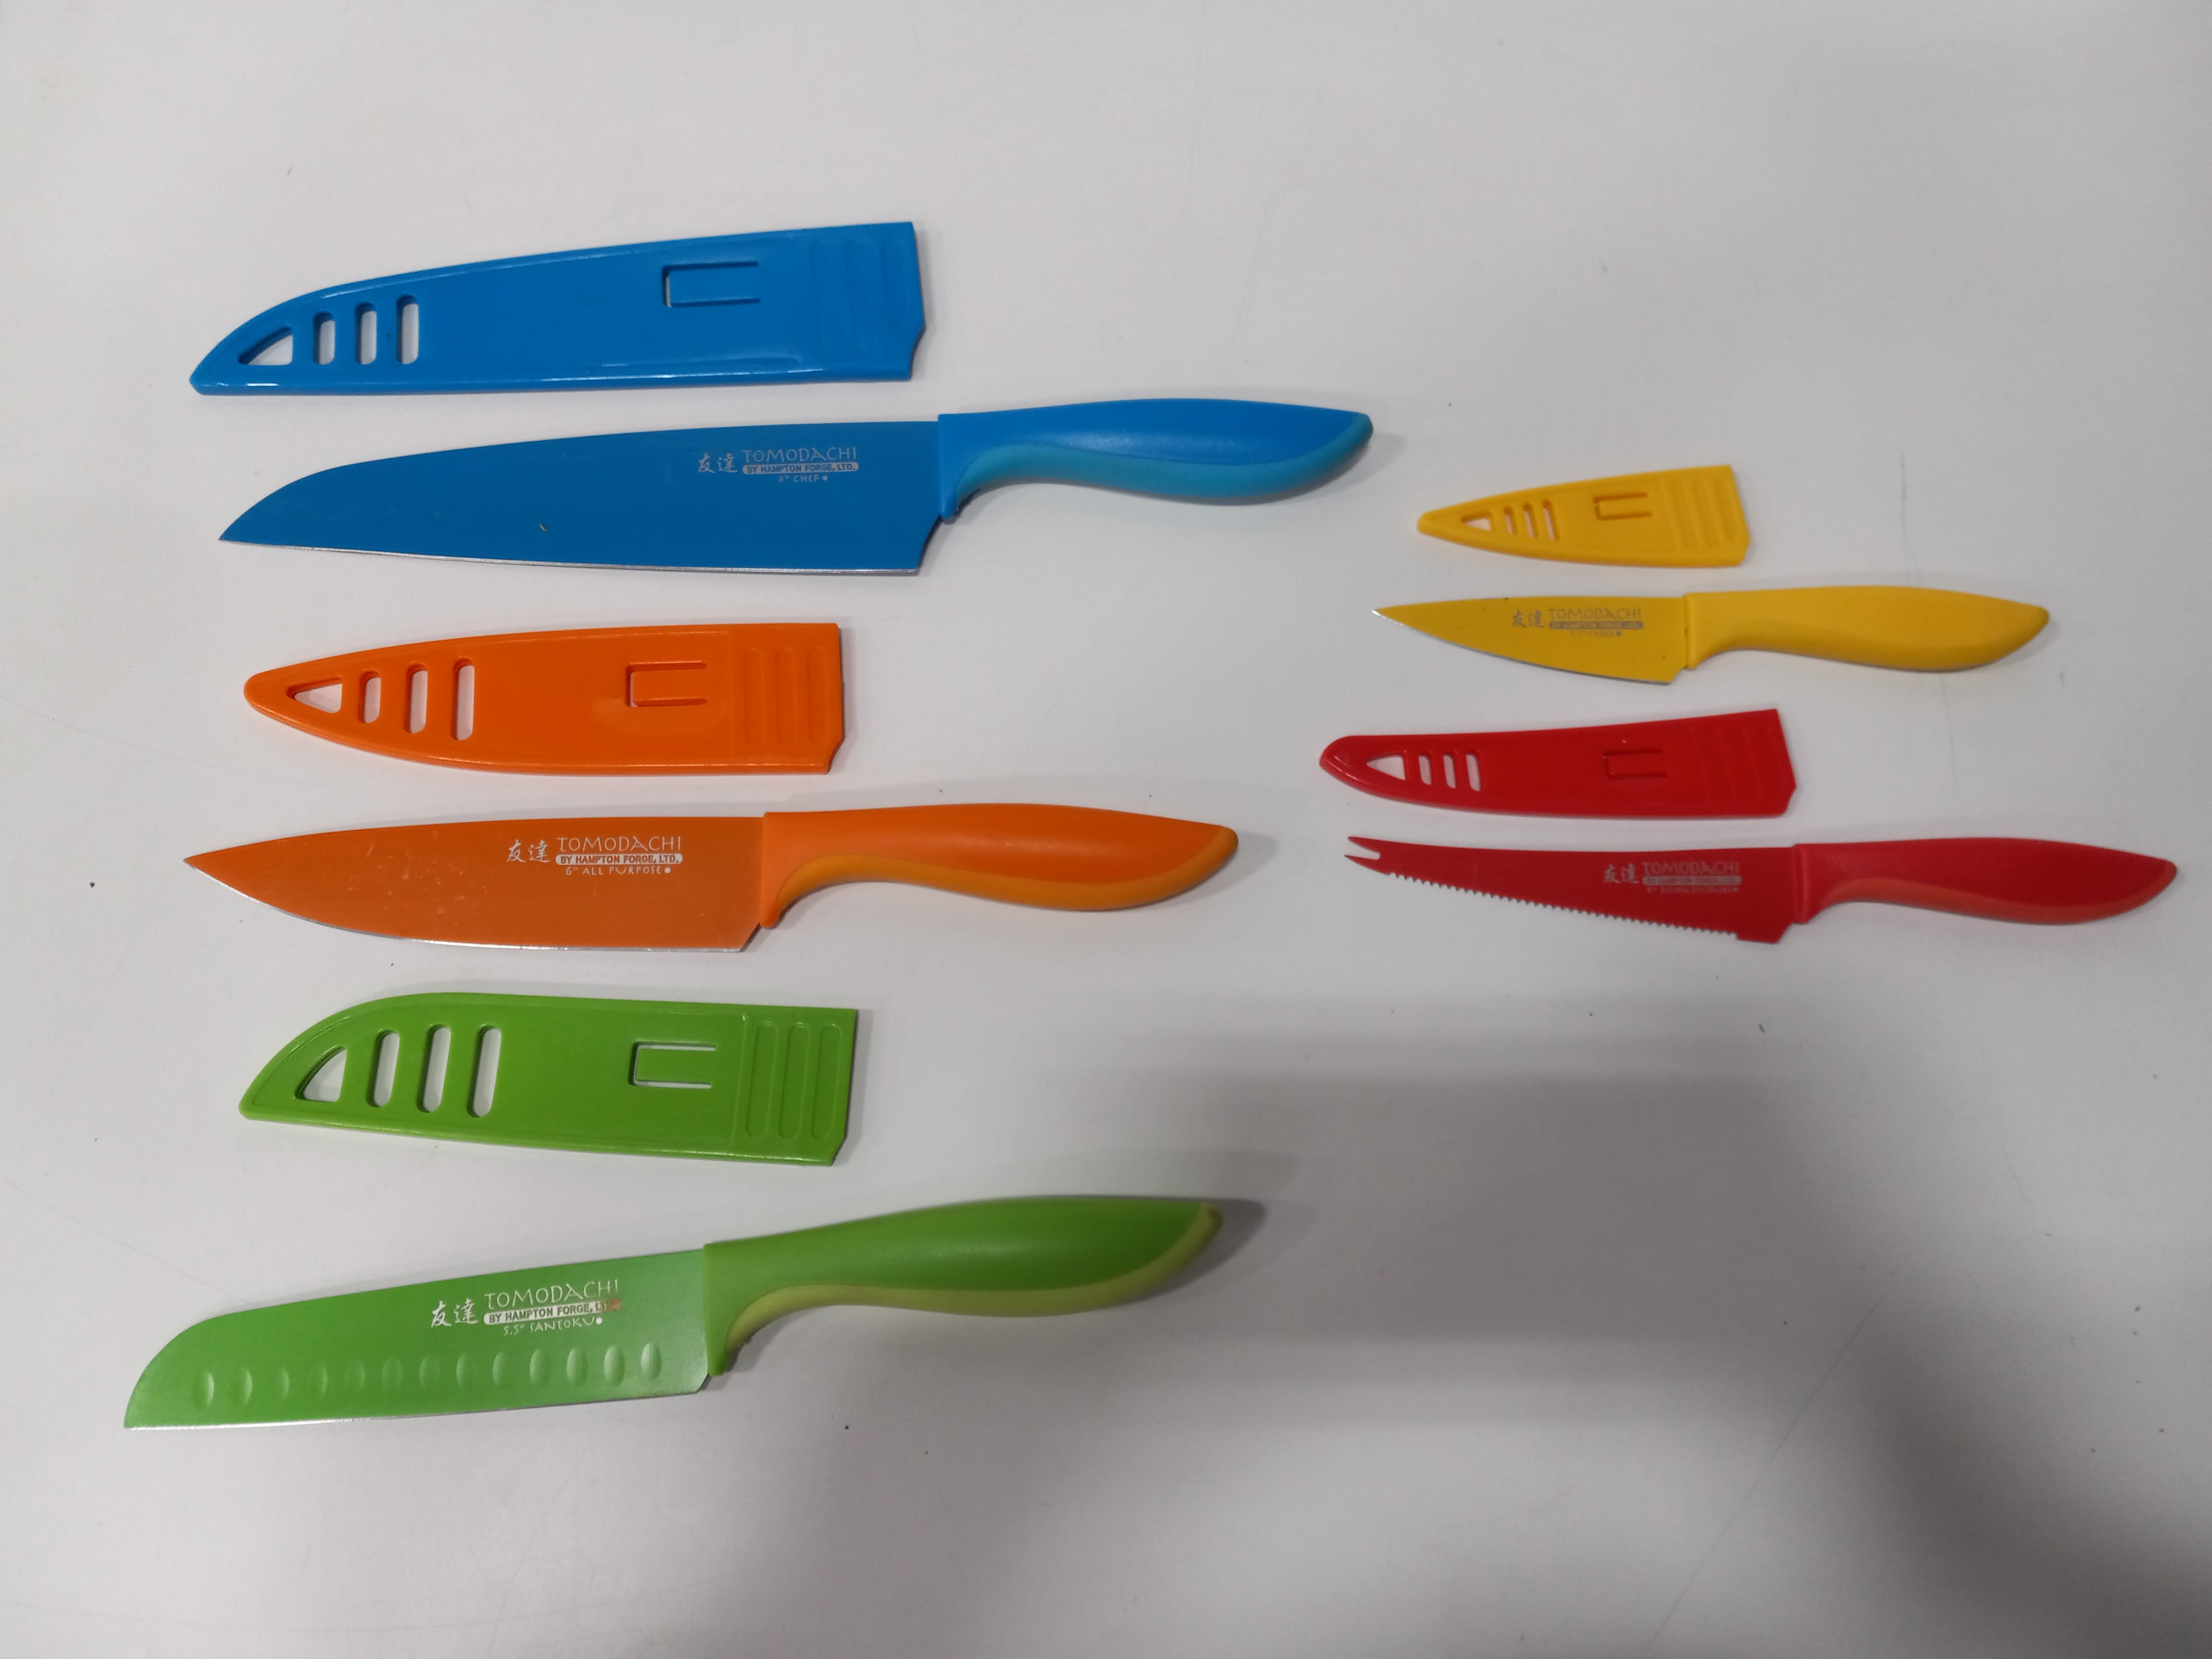 Buy the Bundle of 5 Assorted Multicolor Tomodachi by Hampton Forge